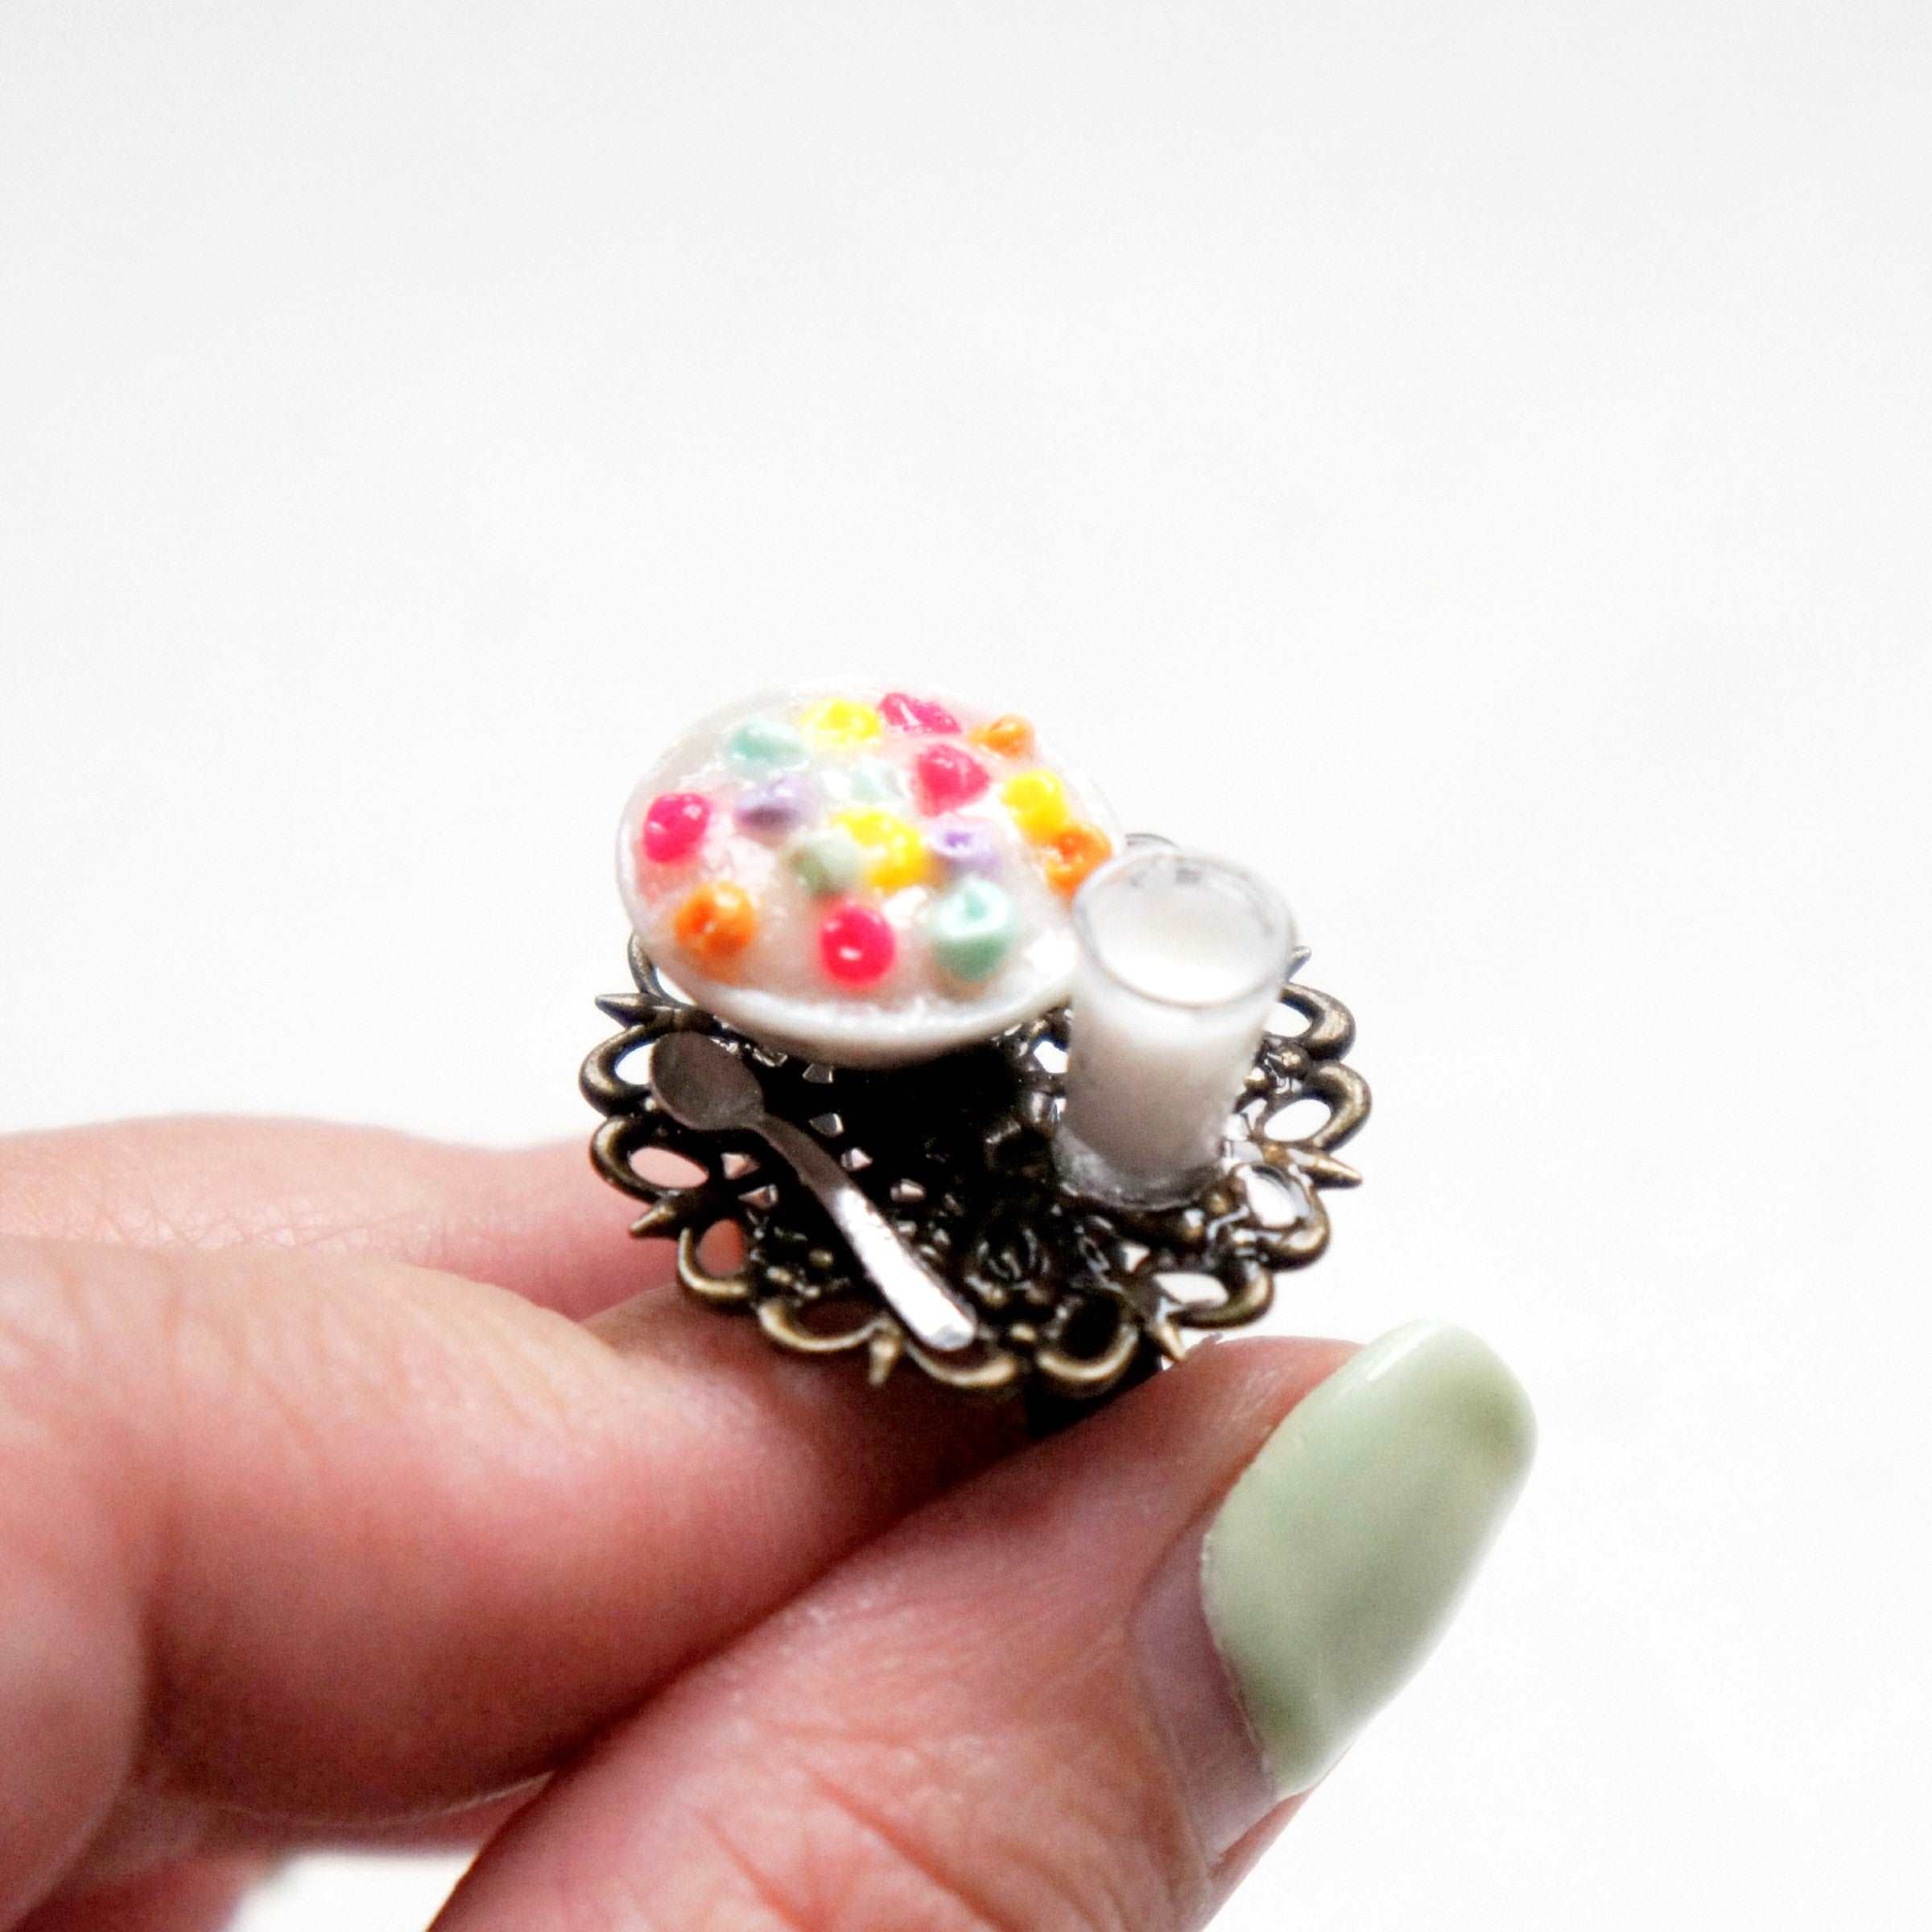 Cereals and Milk Ring - Jillicious charms and accessories